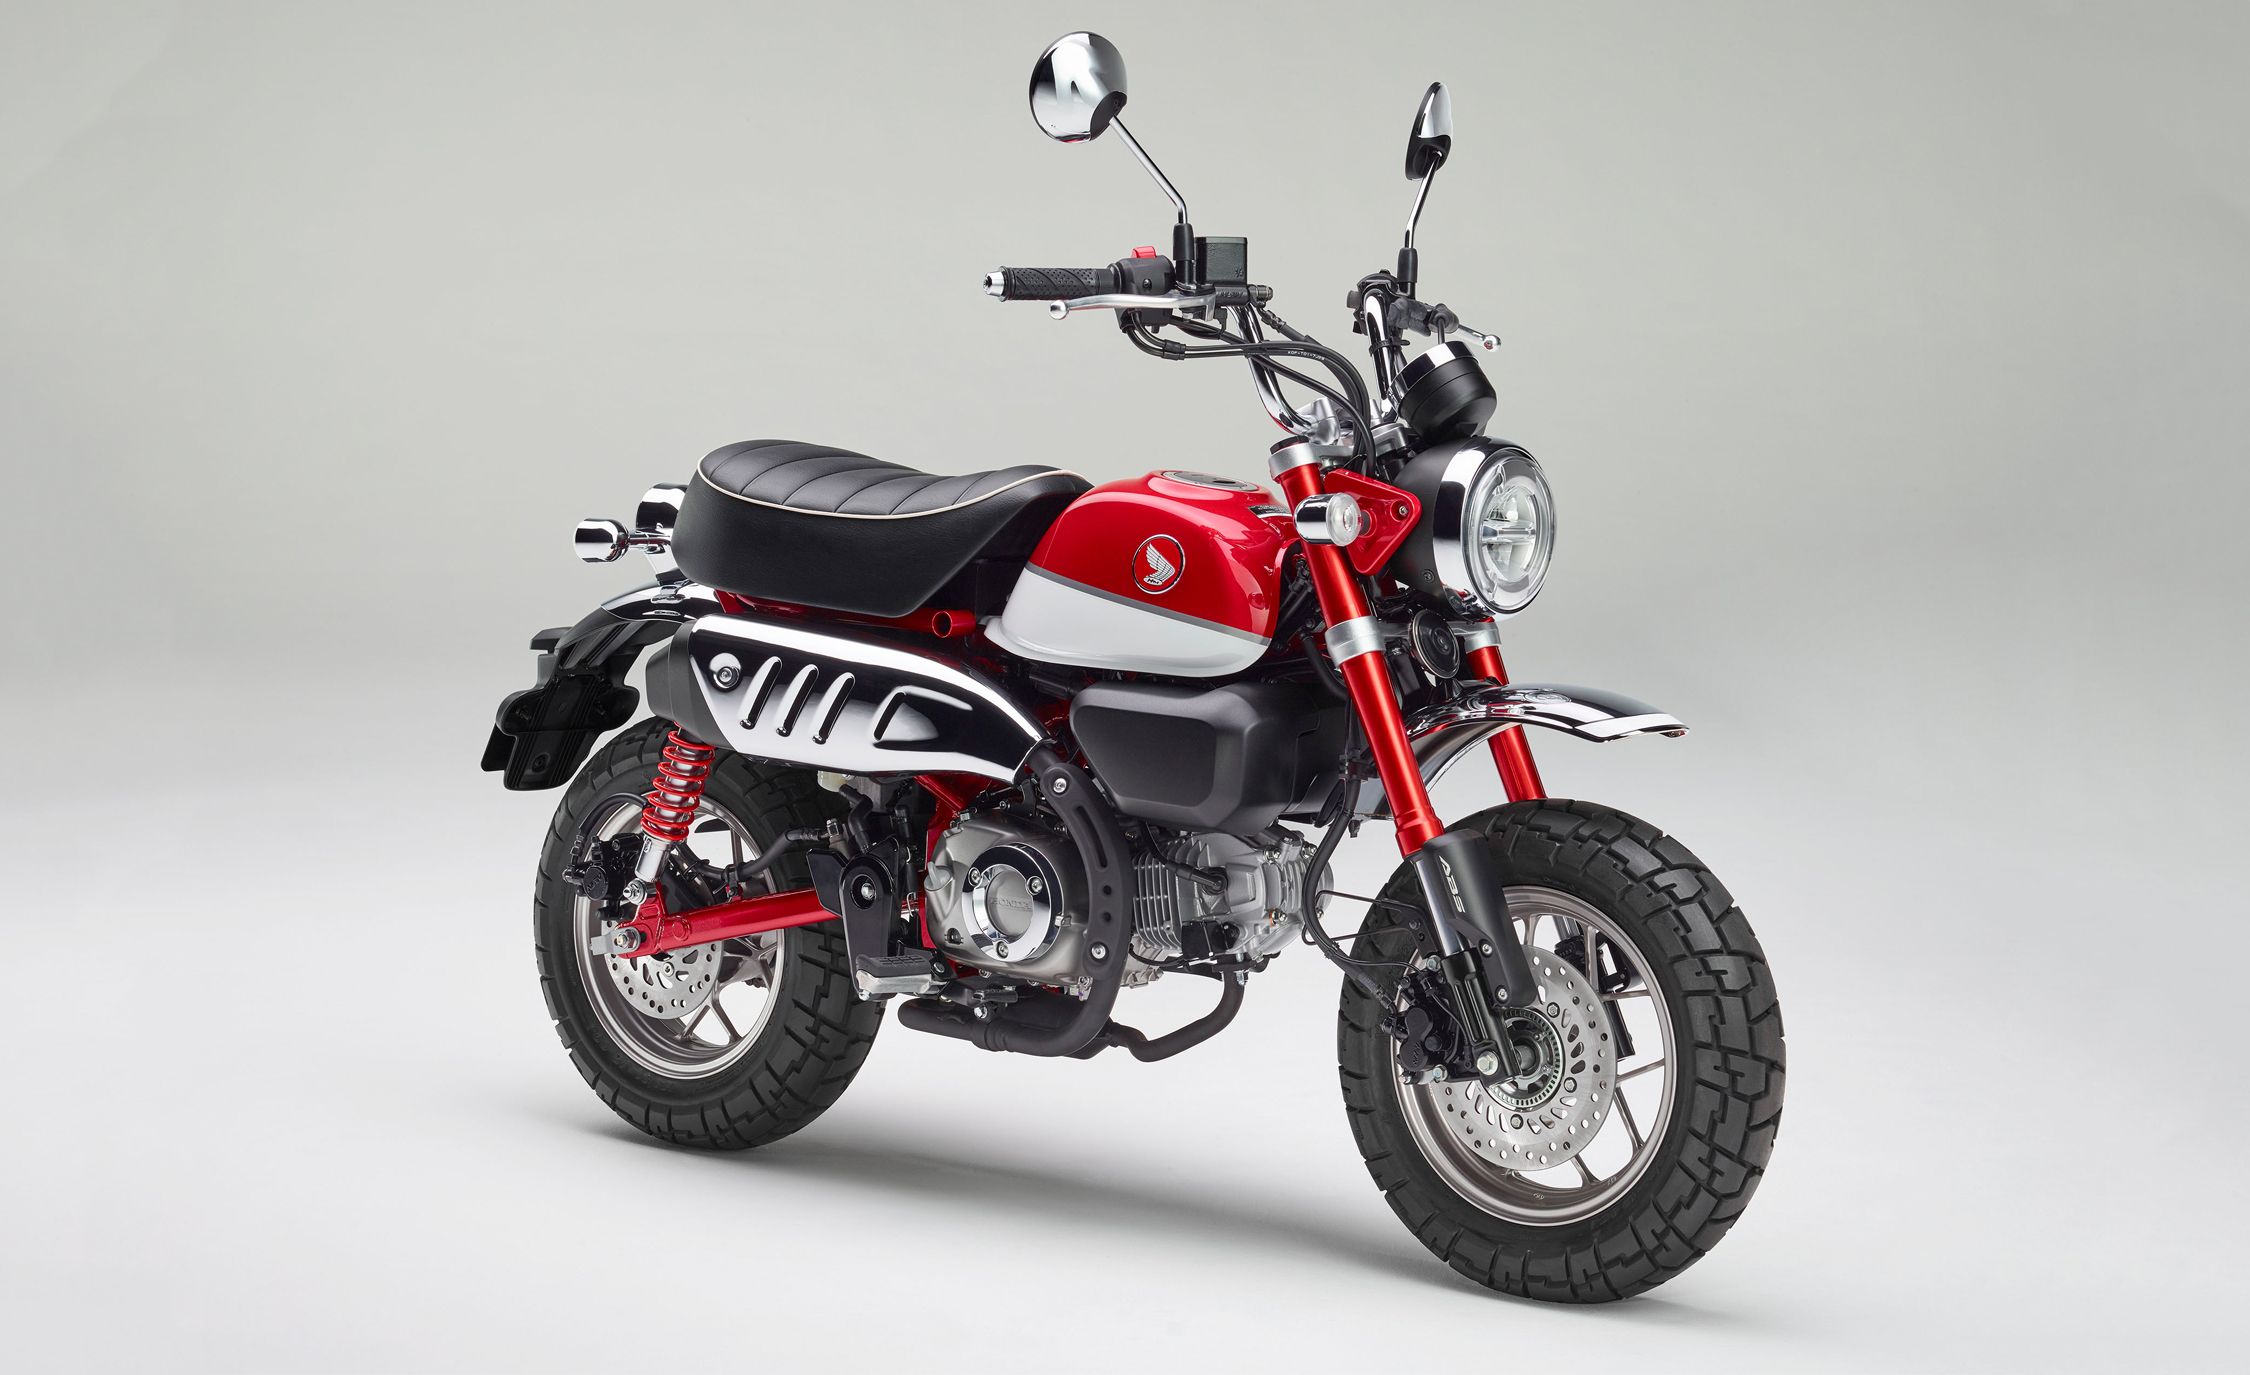 Honda Is Bringing Super Cub And Monkey Motorcycles Back To The U S